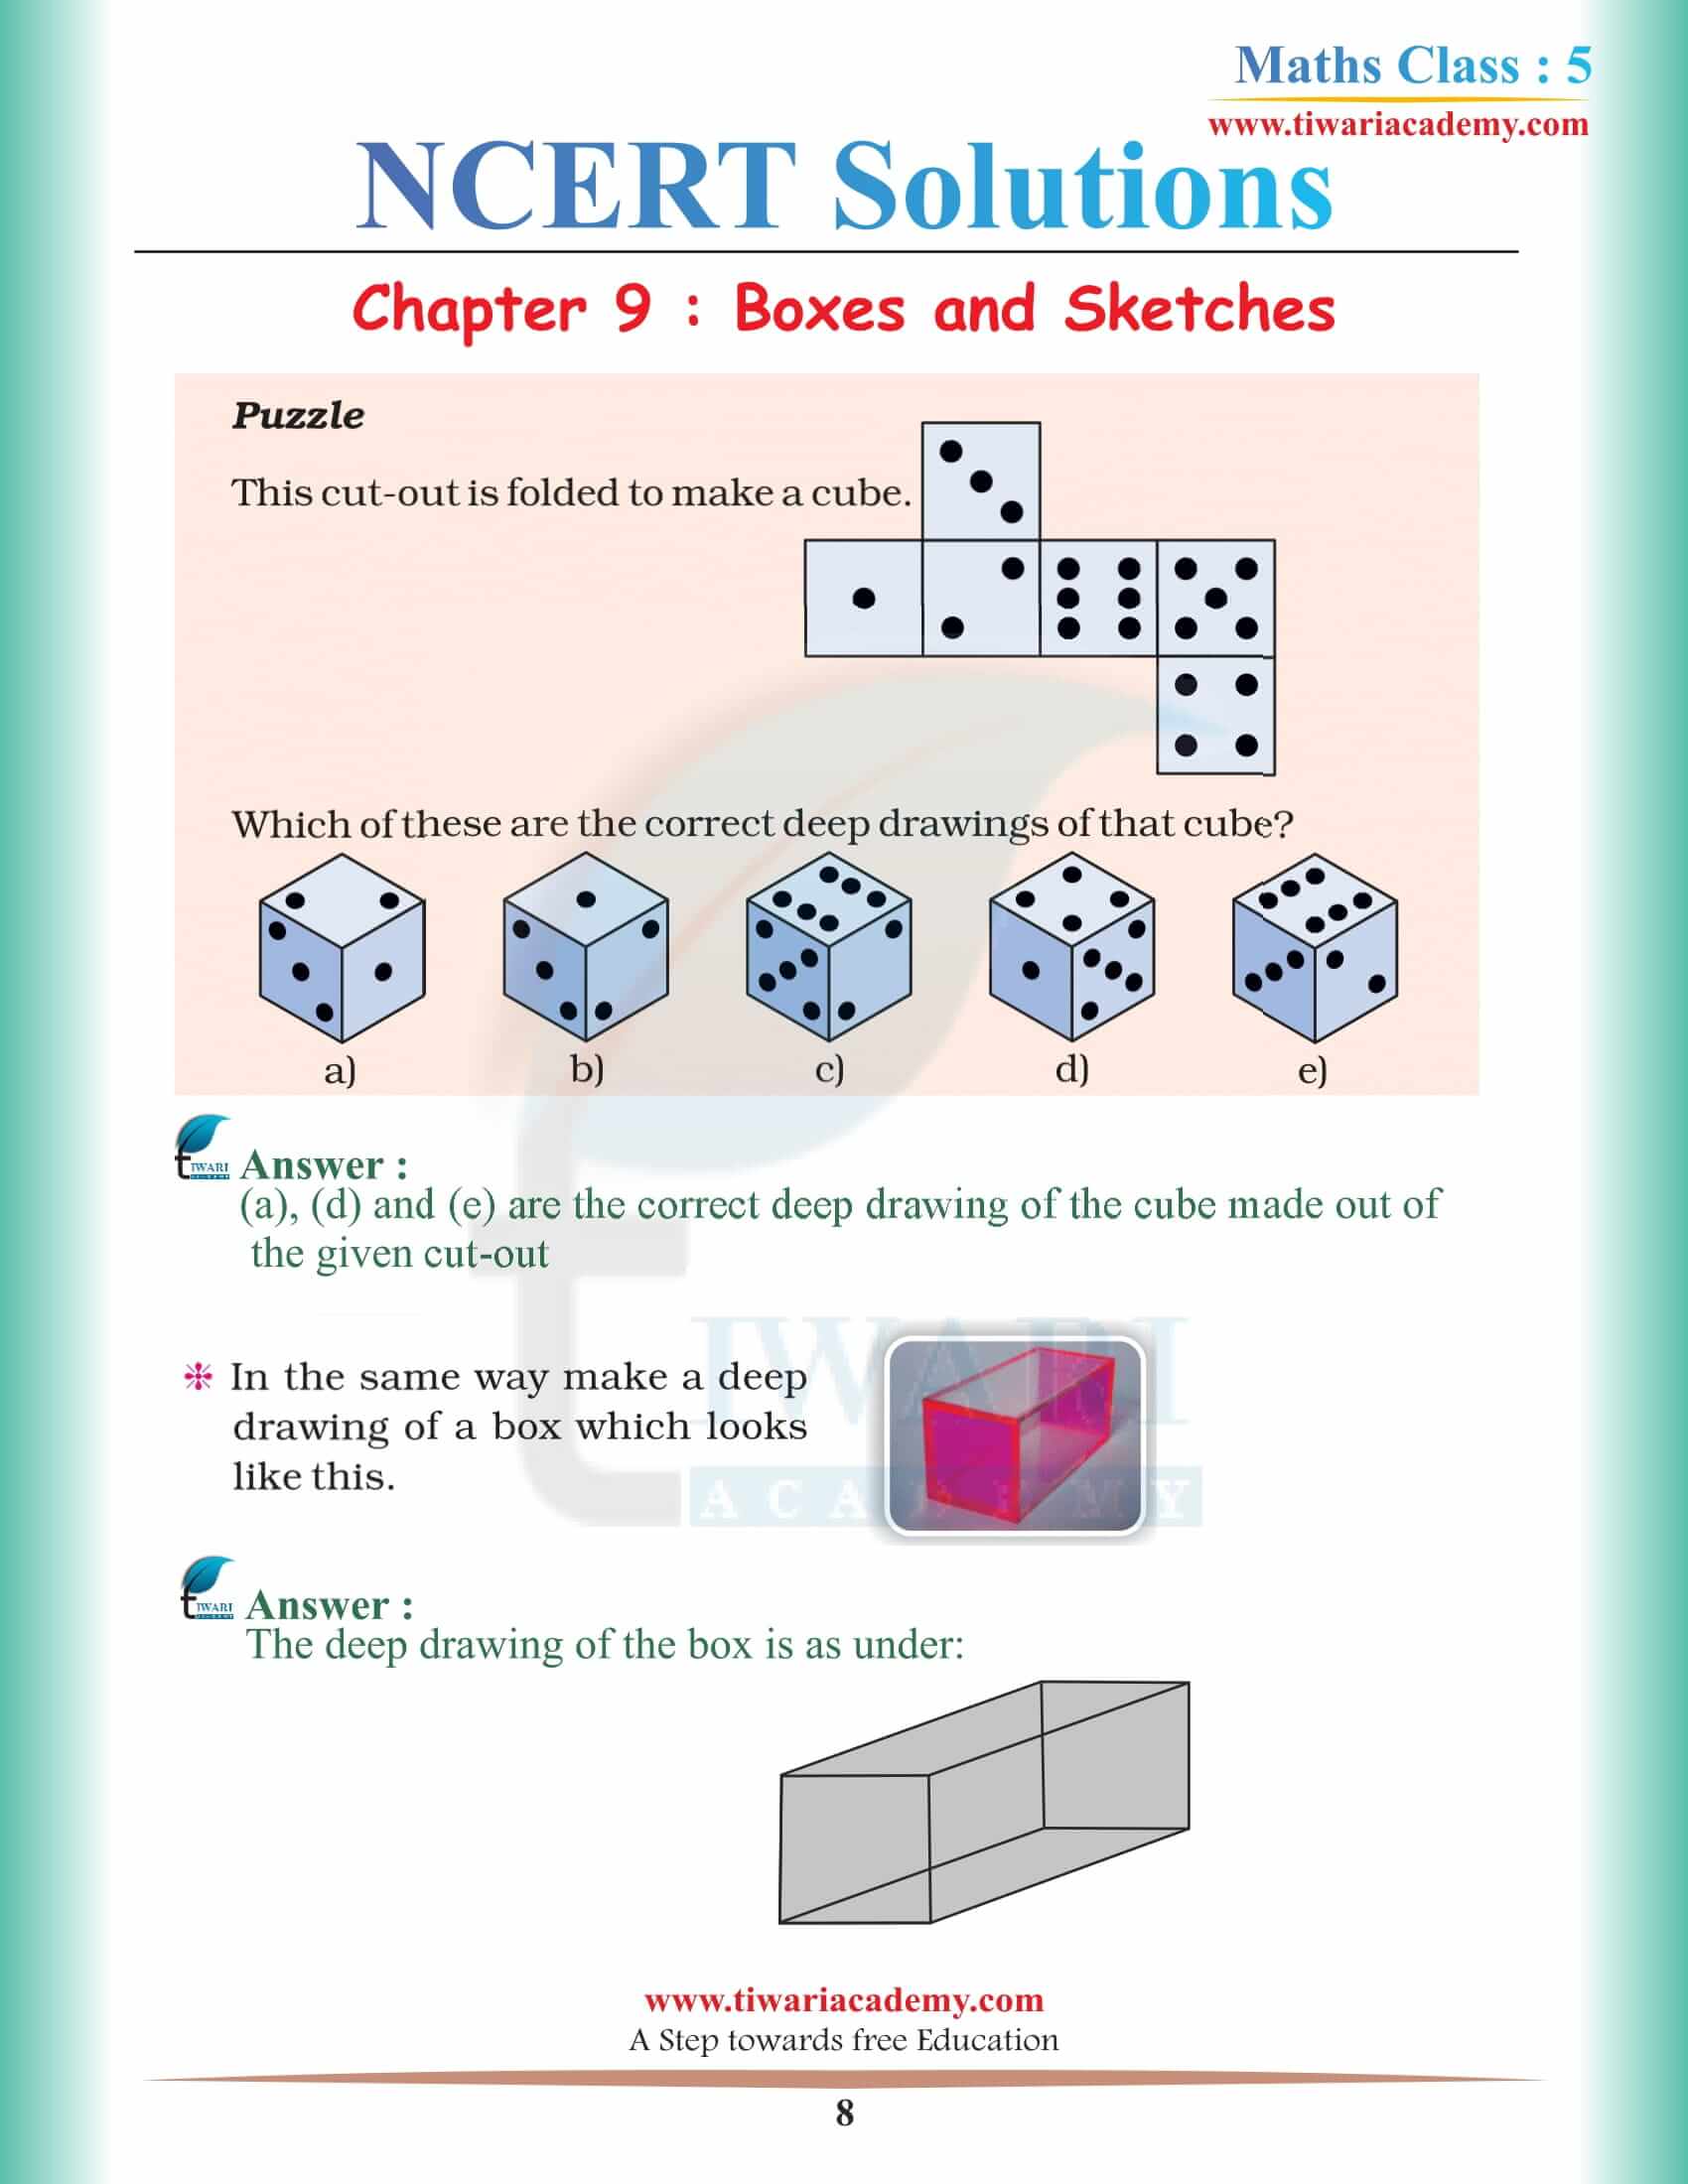 Class 5 Maths NCERT Chapter 9 Solutions in PDF